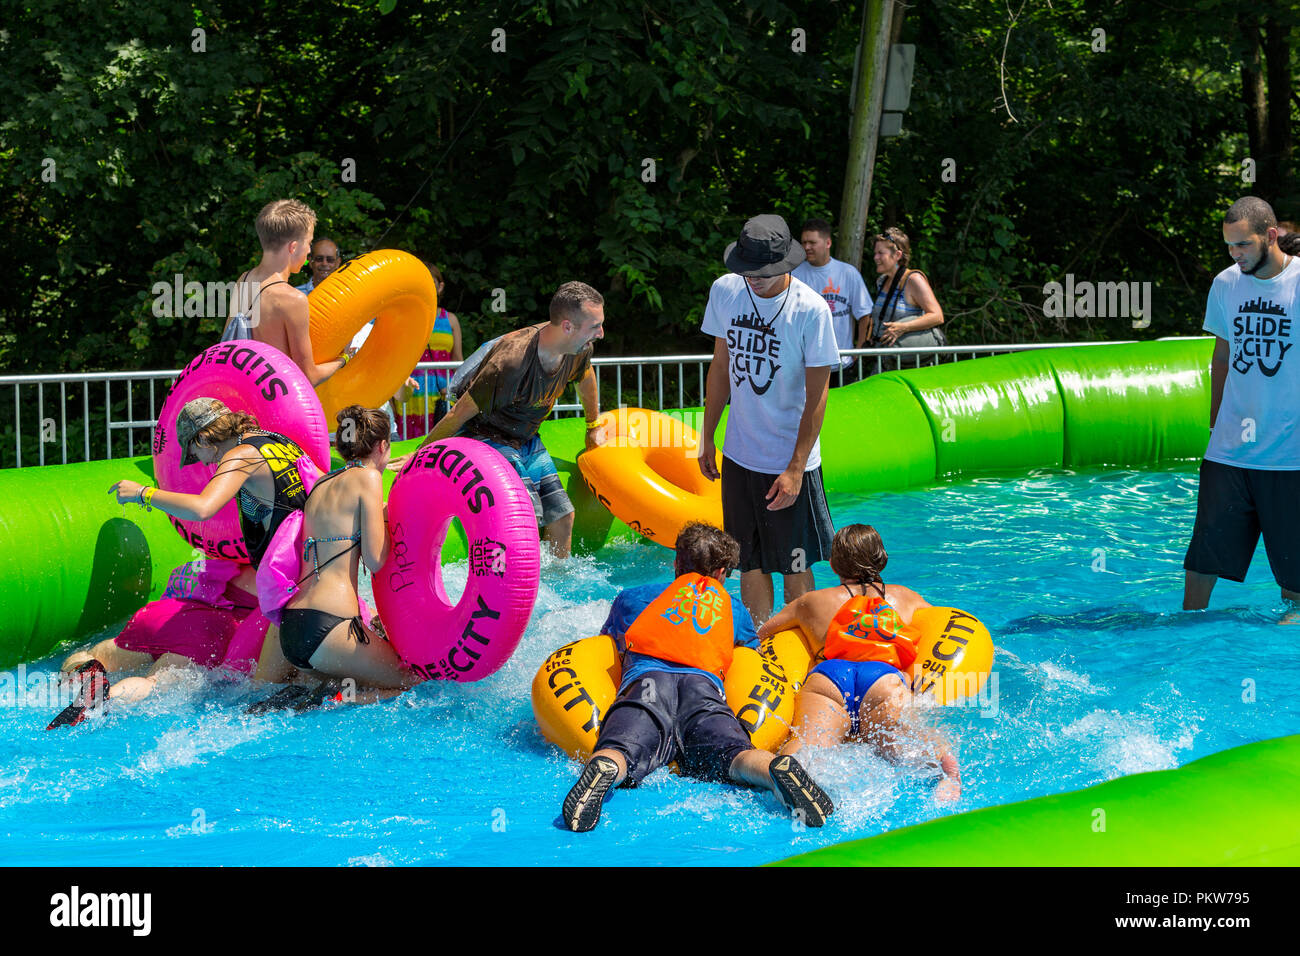 Lancaster, PA, USA - July 19, 2015: Riding a circular raft at the Slide the City event features a giant water Slip 'N Slide that is a 1,000-foot long. Stock Photo